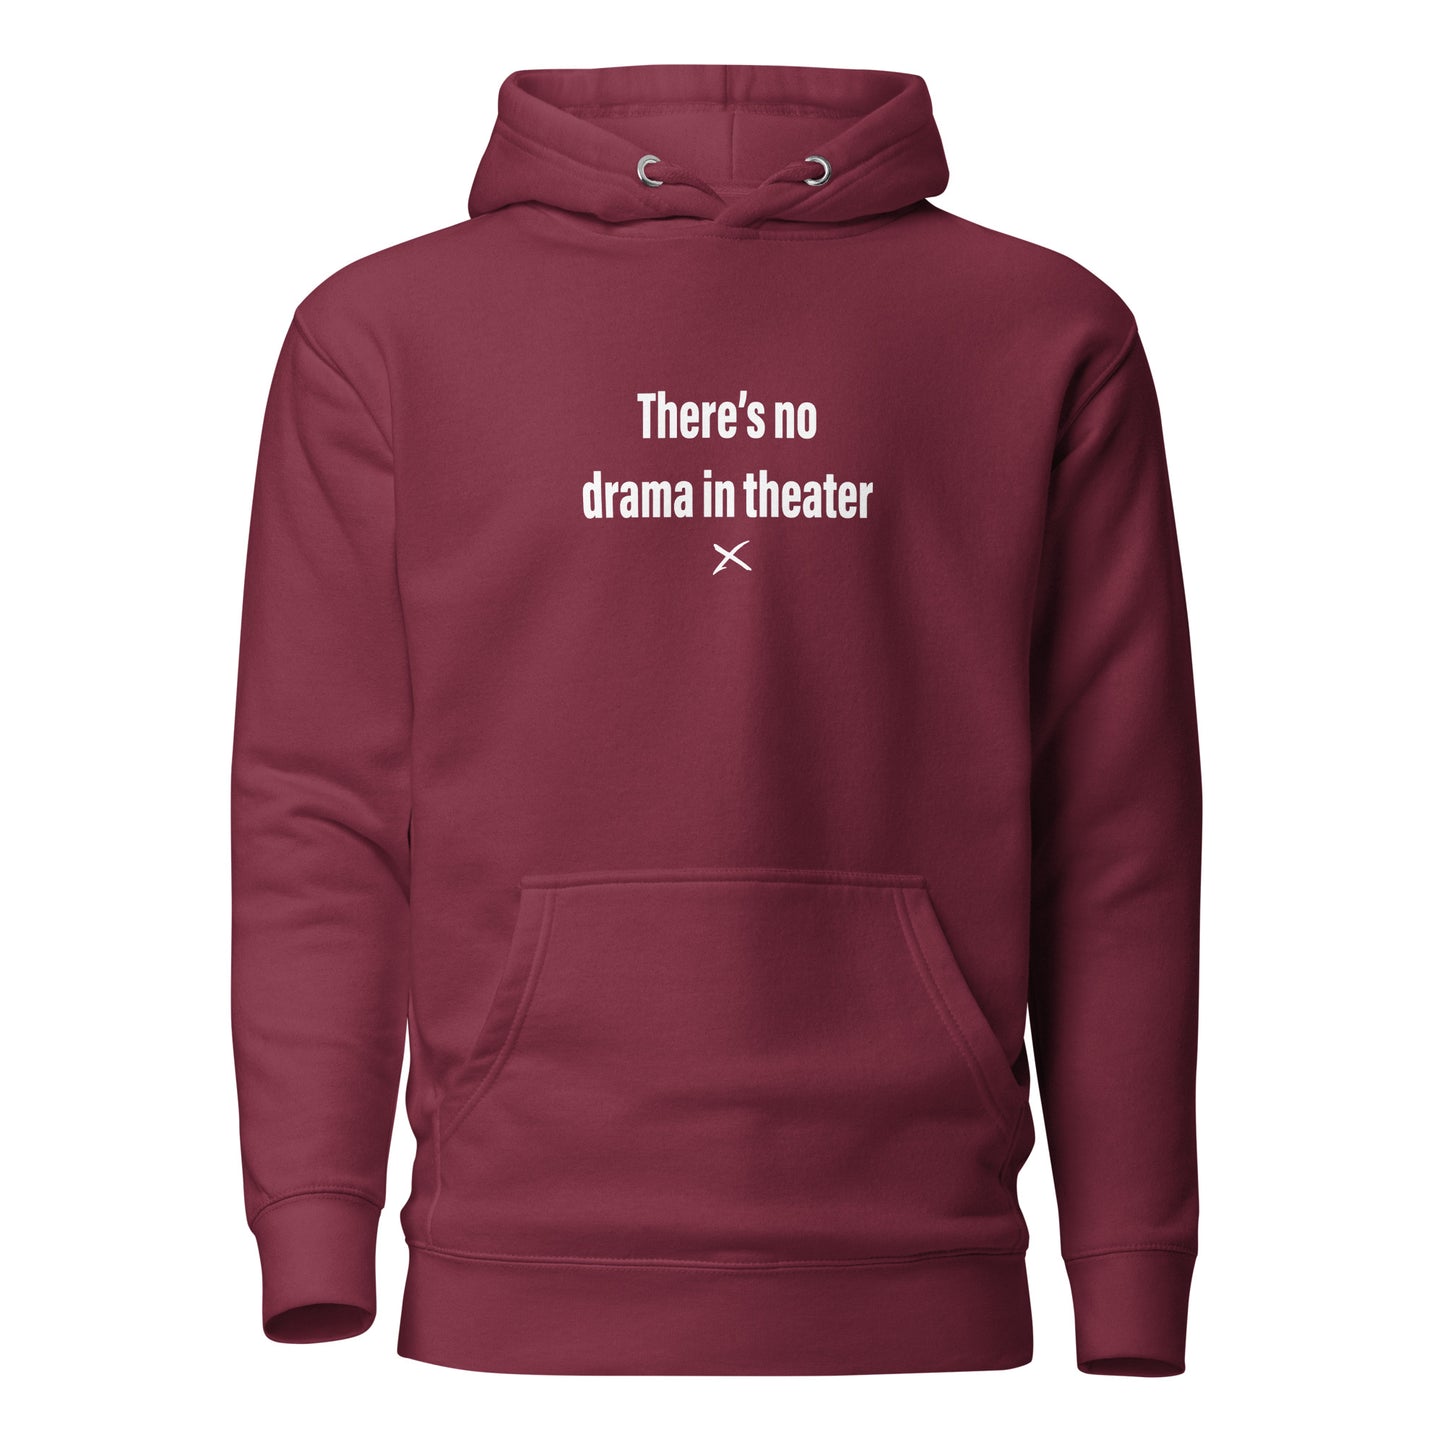 There's no drama in theater - Hoodie